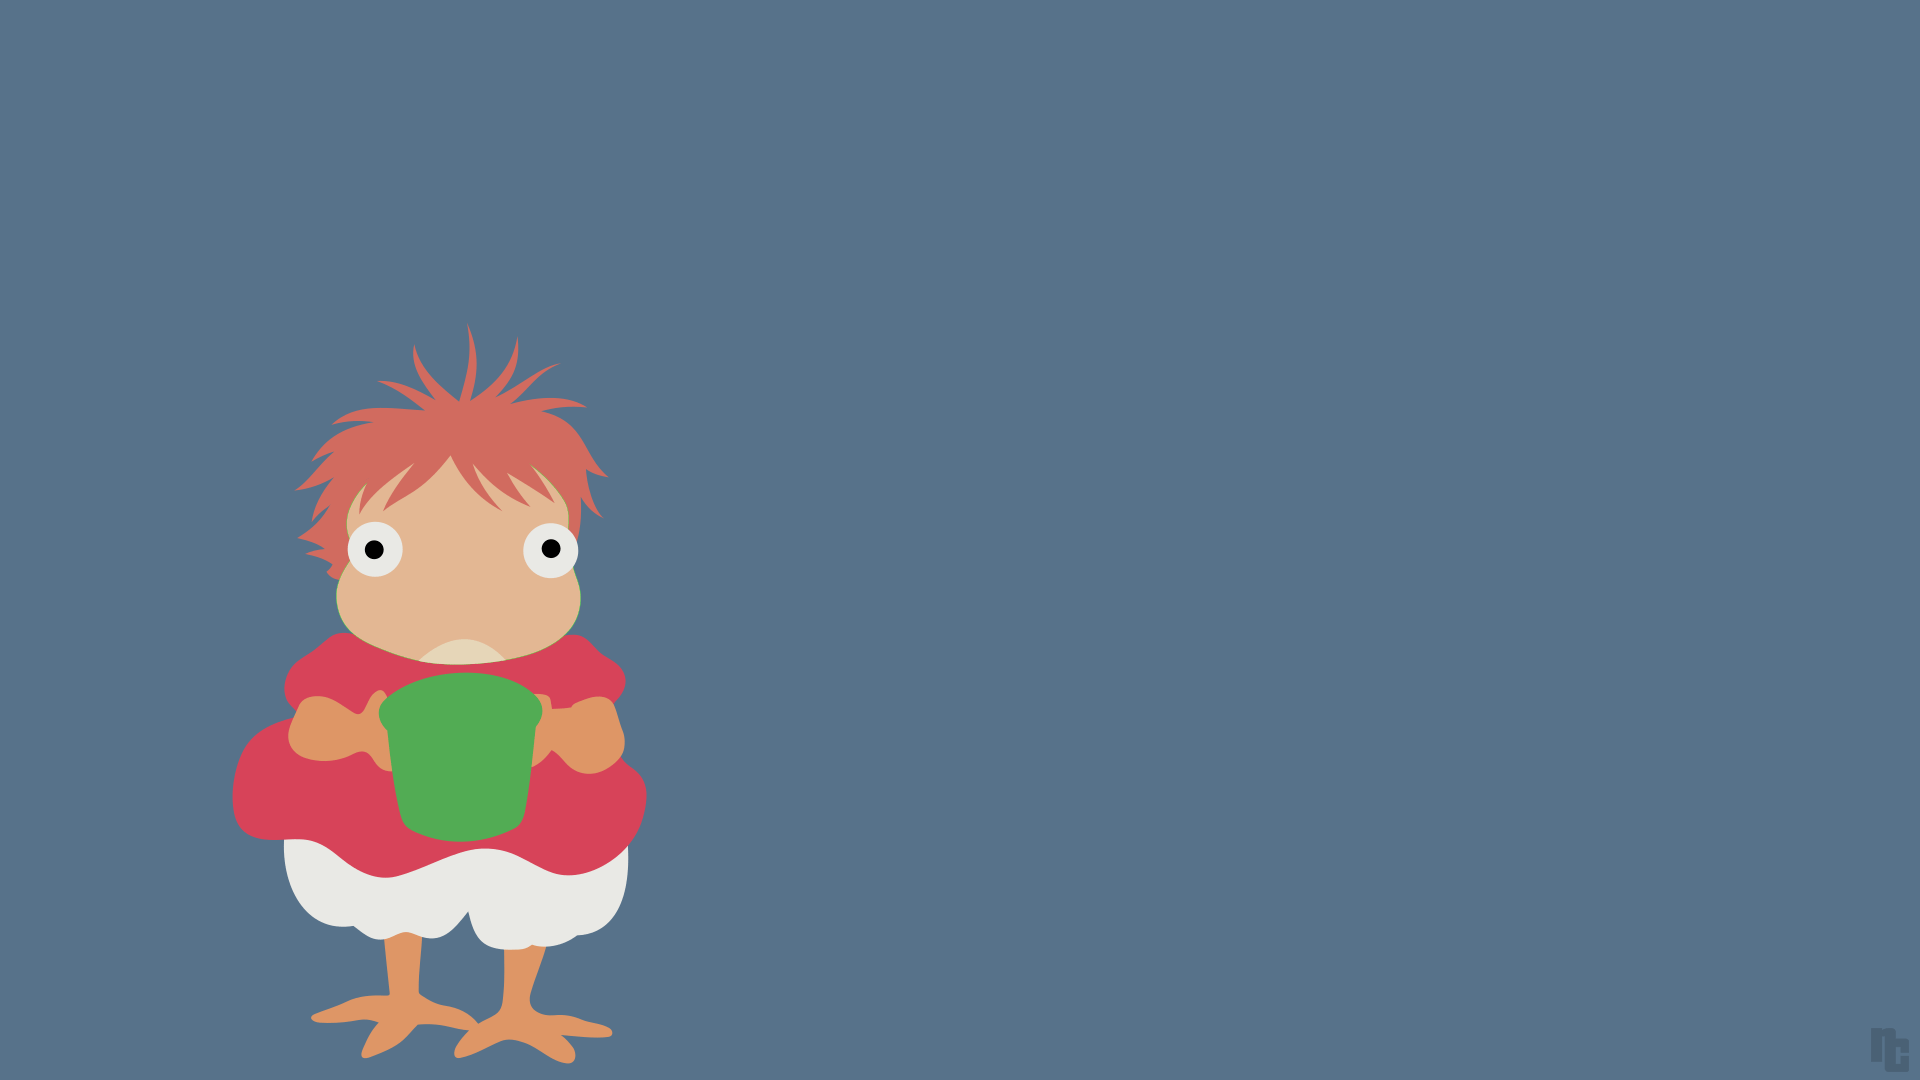 Ponyo on the Cliff by the Sea Minimalist Wallpaper